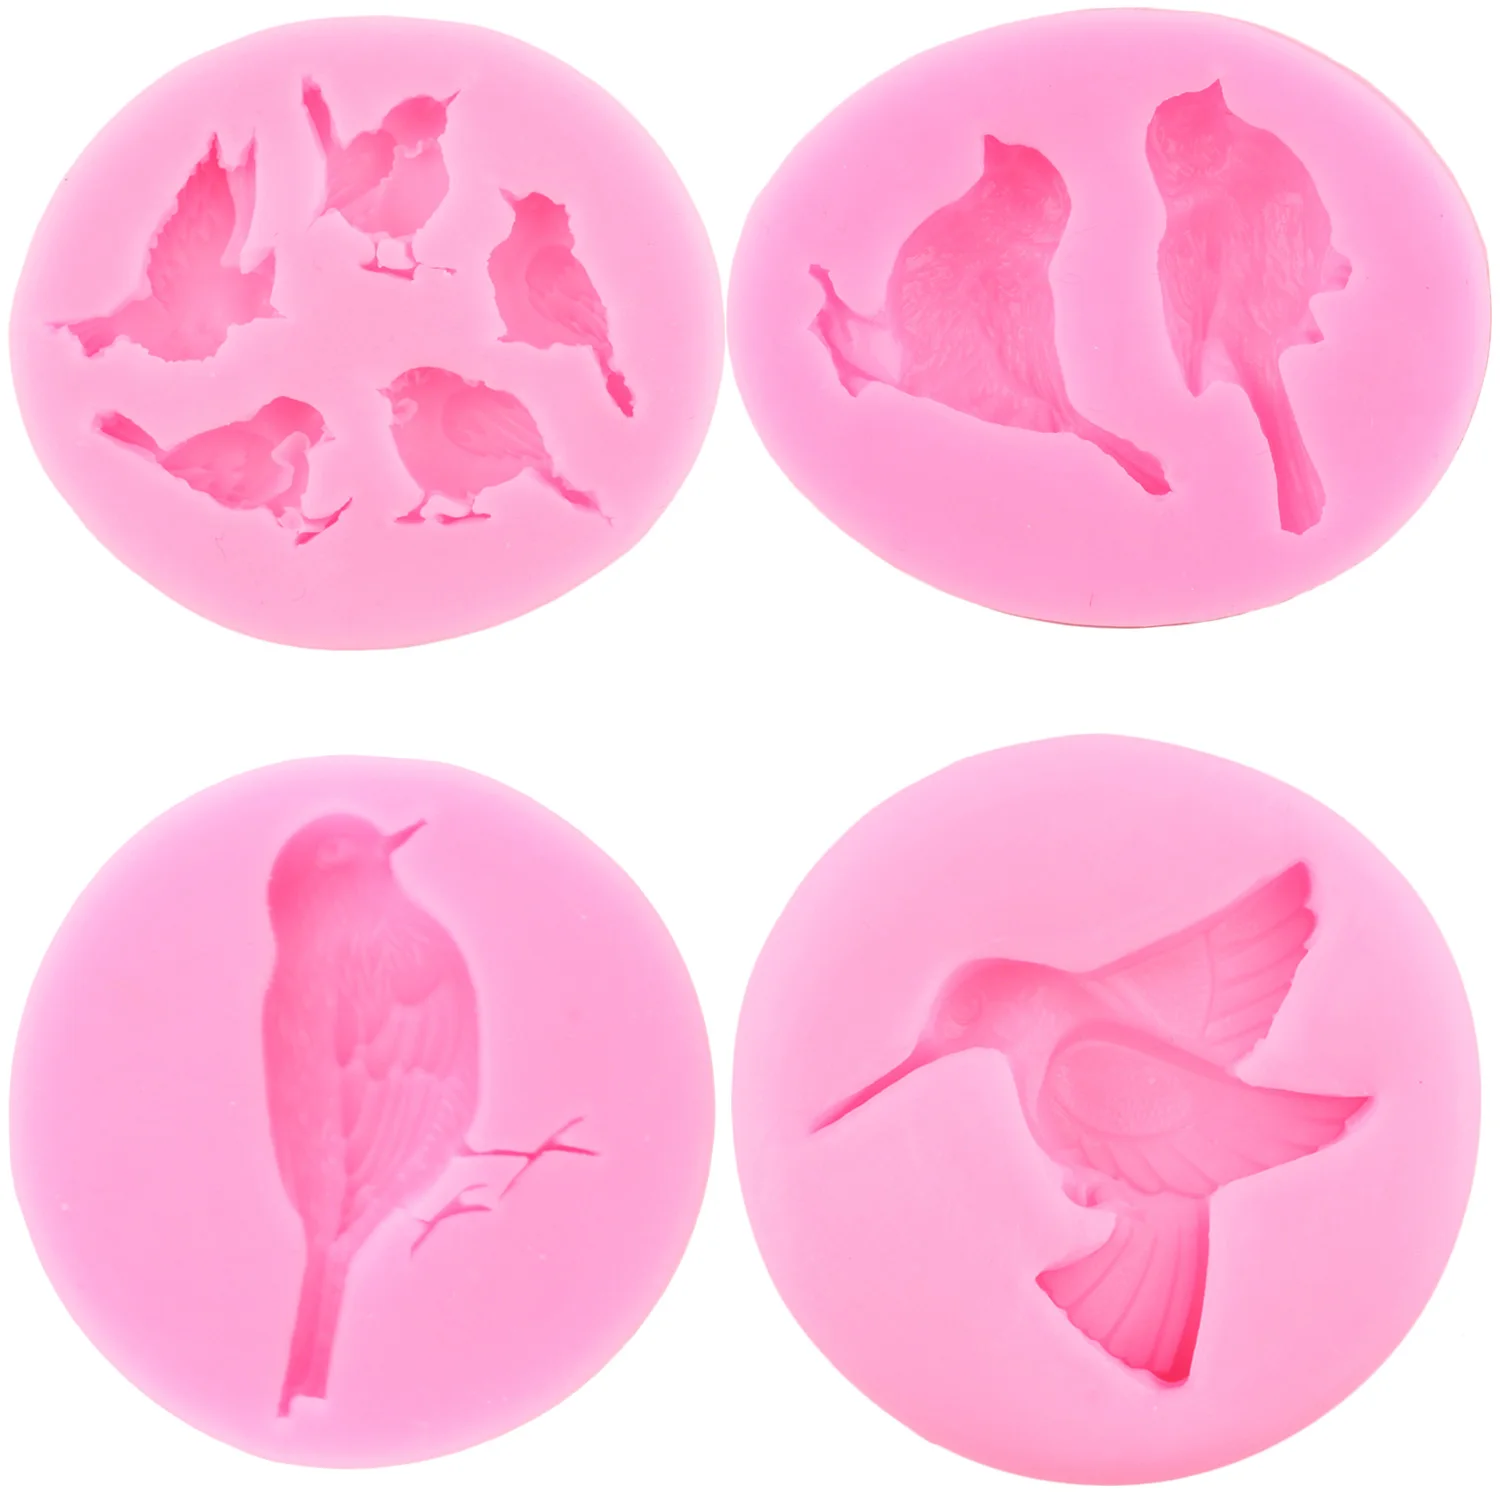 

Birds Silicone Molds Fondant Cake Decorating Tools DIY Candy Resin Clay Chocolate Gumpaste Moulds Cupcake Baking Mould